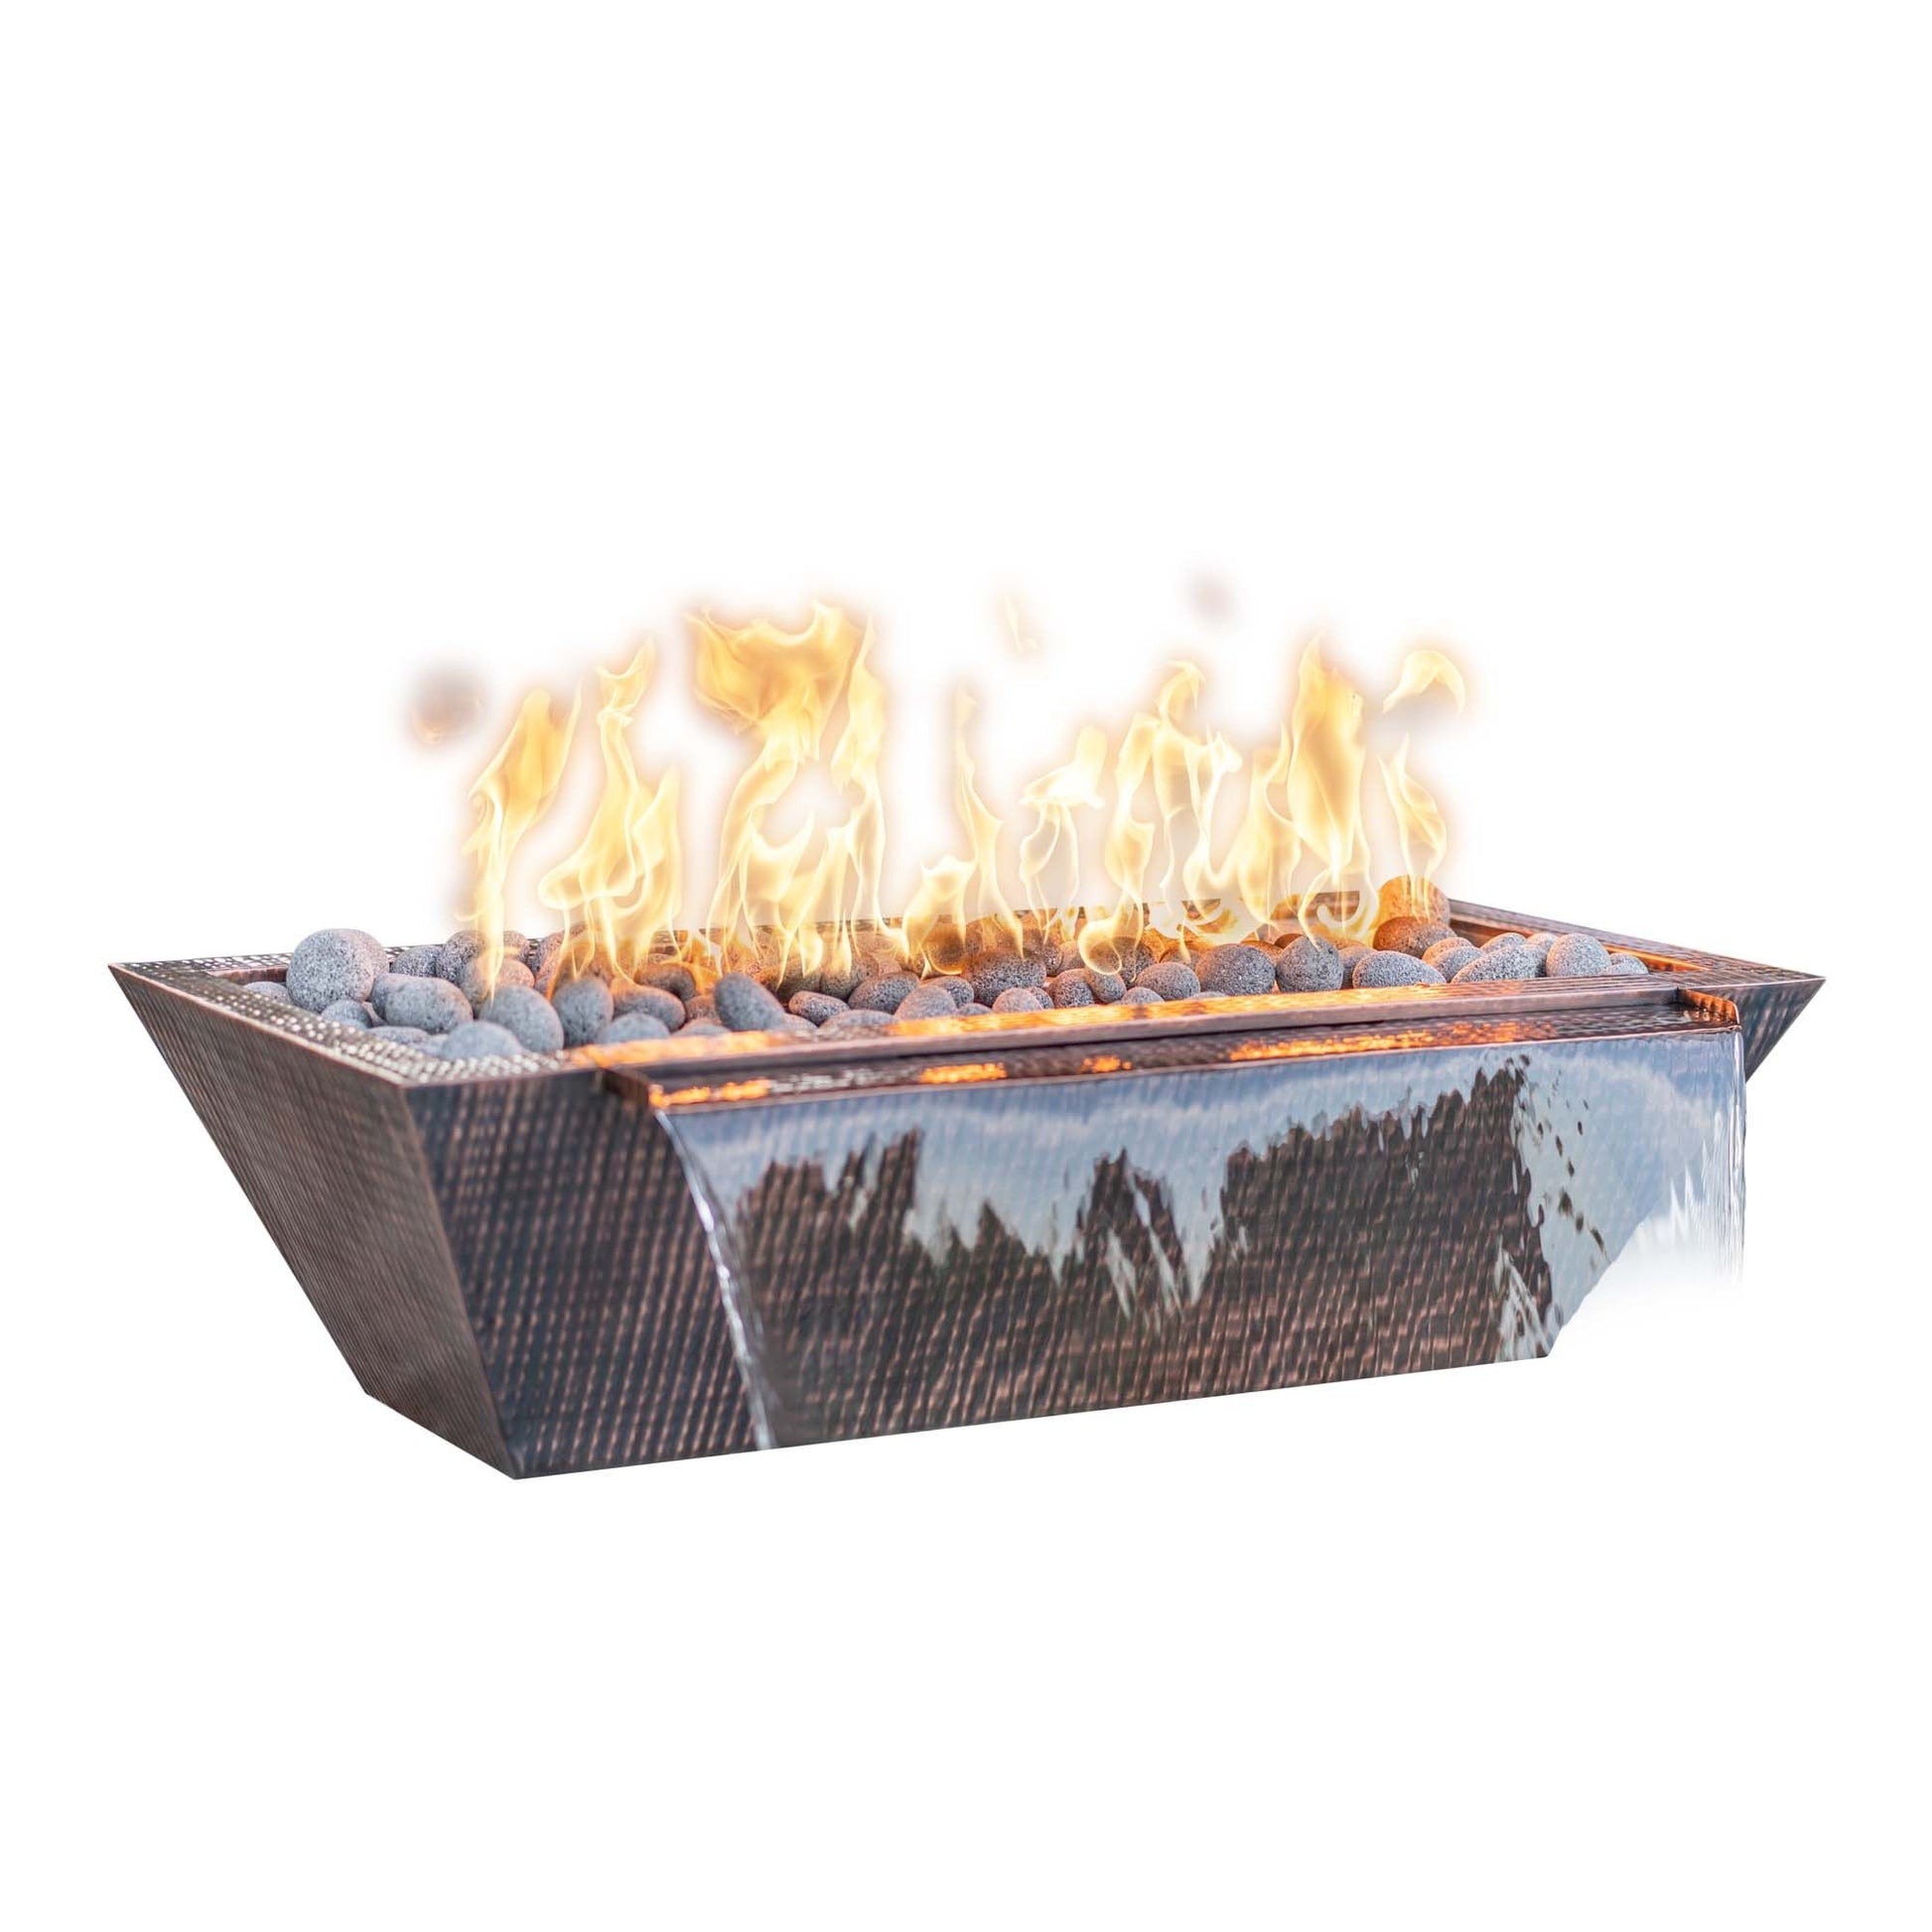 The Outdoor Plus Linear Maya Hammered Copper Fire & Water Bowl - OPT-MCFW freeshipping - Luxury Tech Inc.